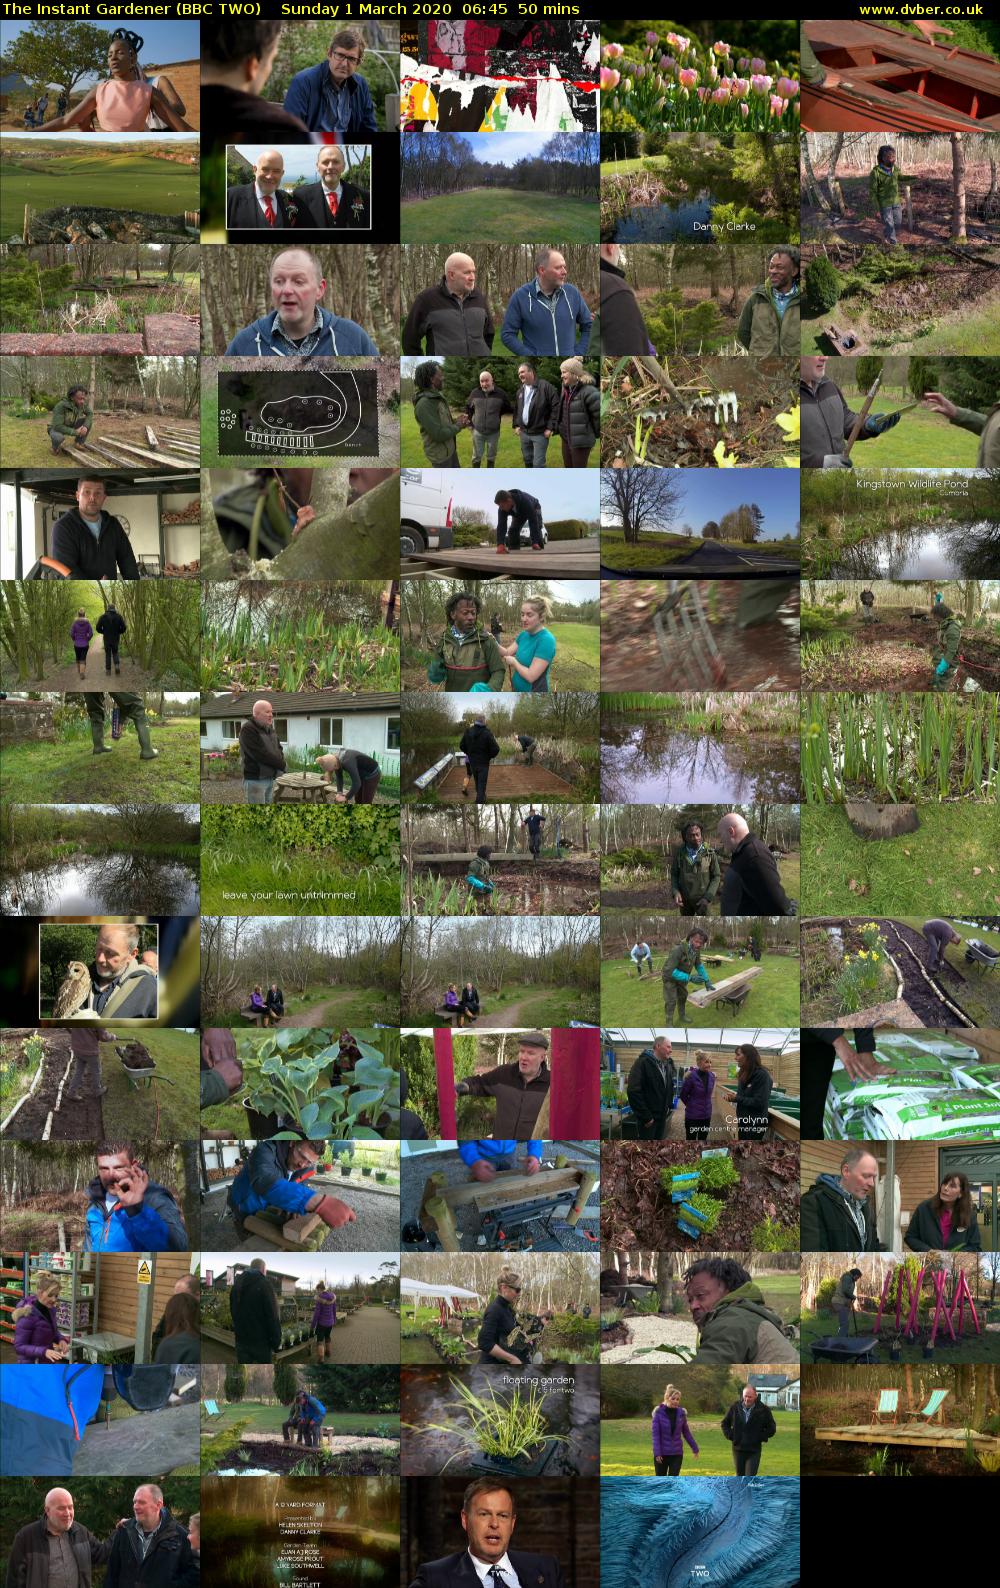 The Instant Gardener (BBC TWO) Sunday 1 March 2020 06:45 - 07:35